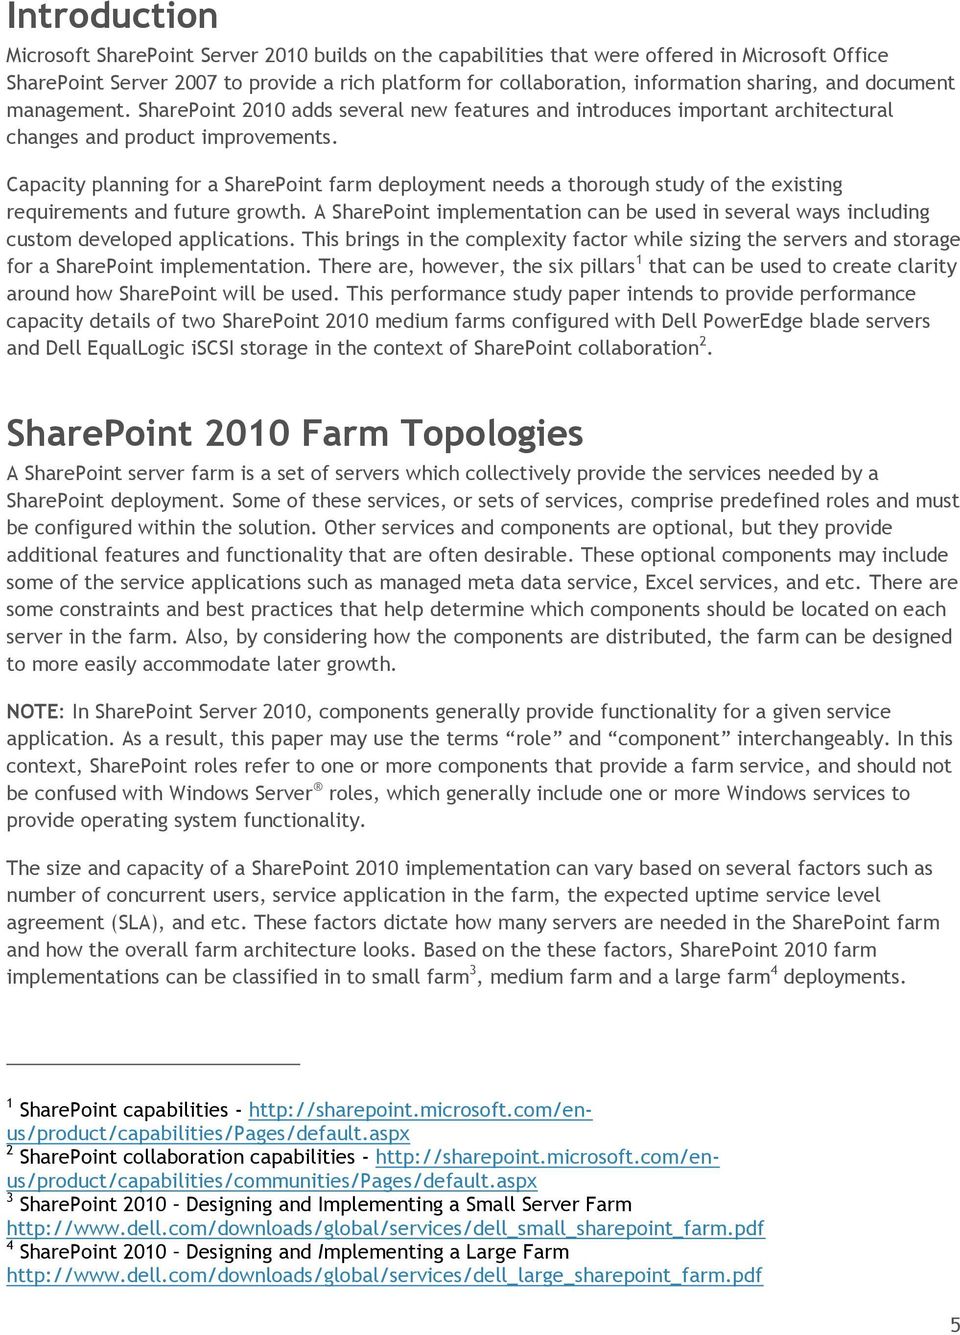 Capacity planning for a SharePoint farm deployment needs a thorough study of the existing requirements and future growth.